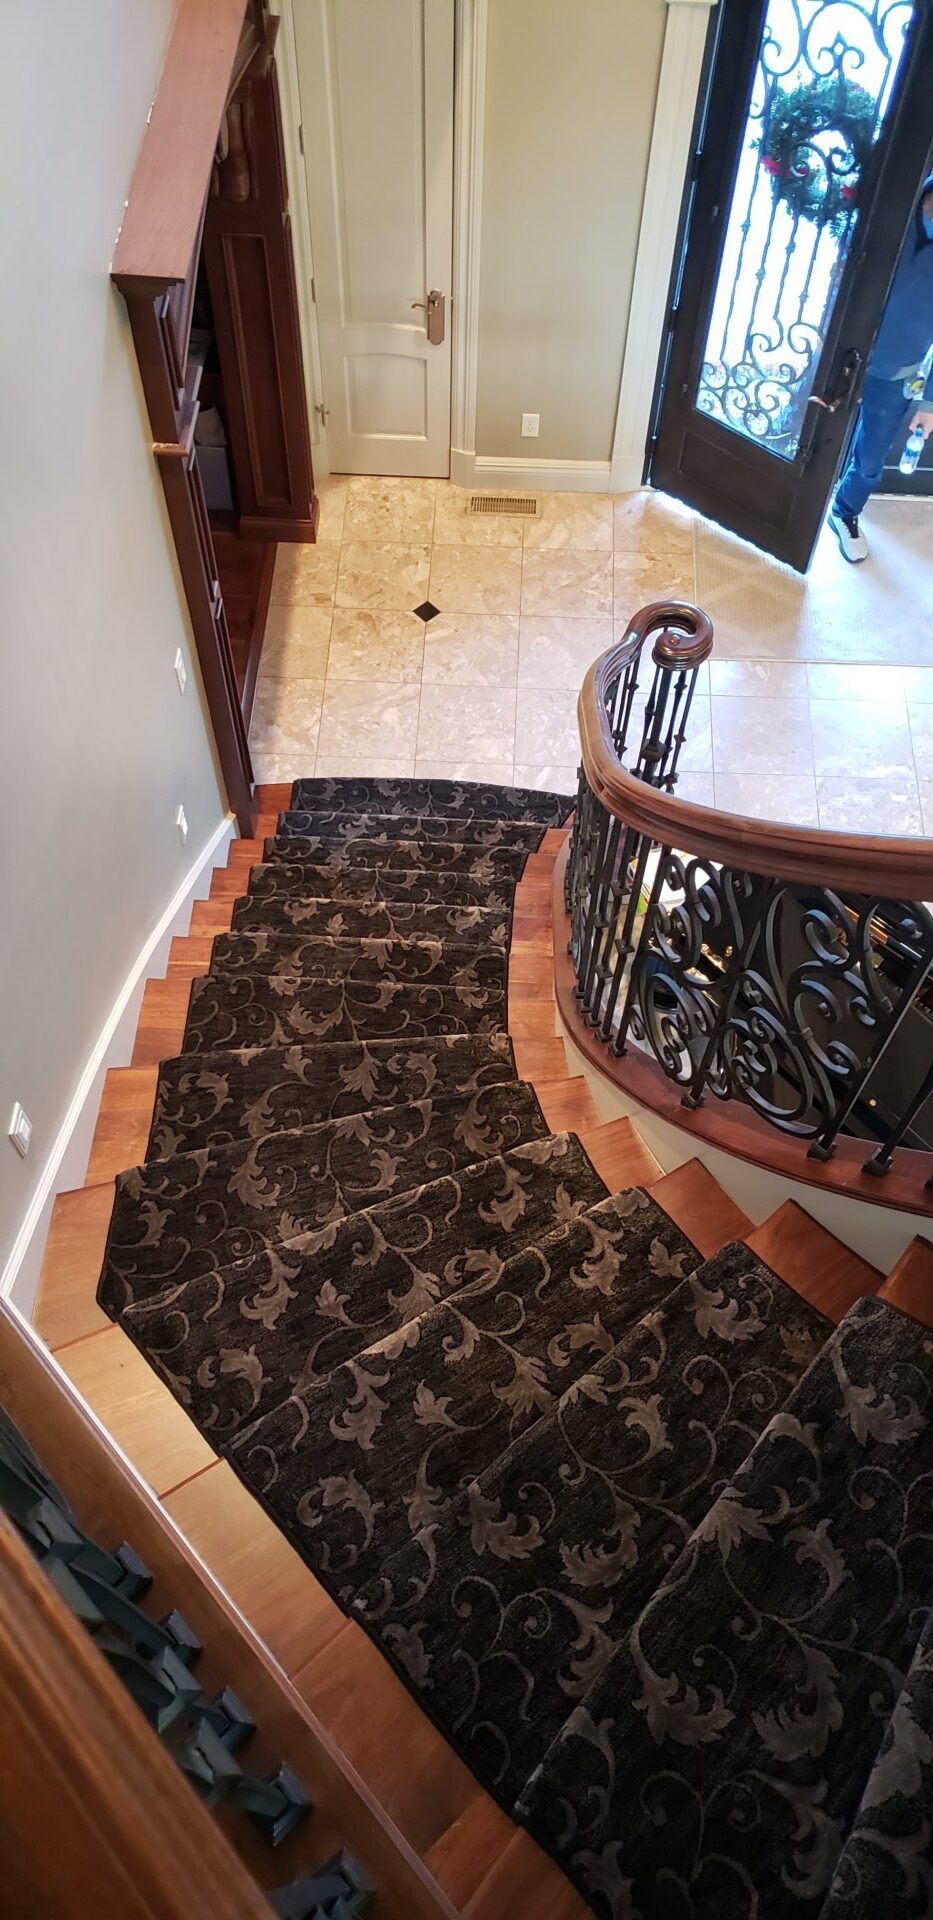 A staircase with a wrought iron railing and carpet.